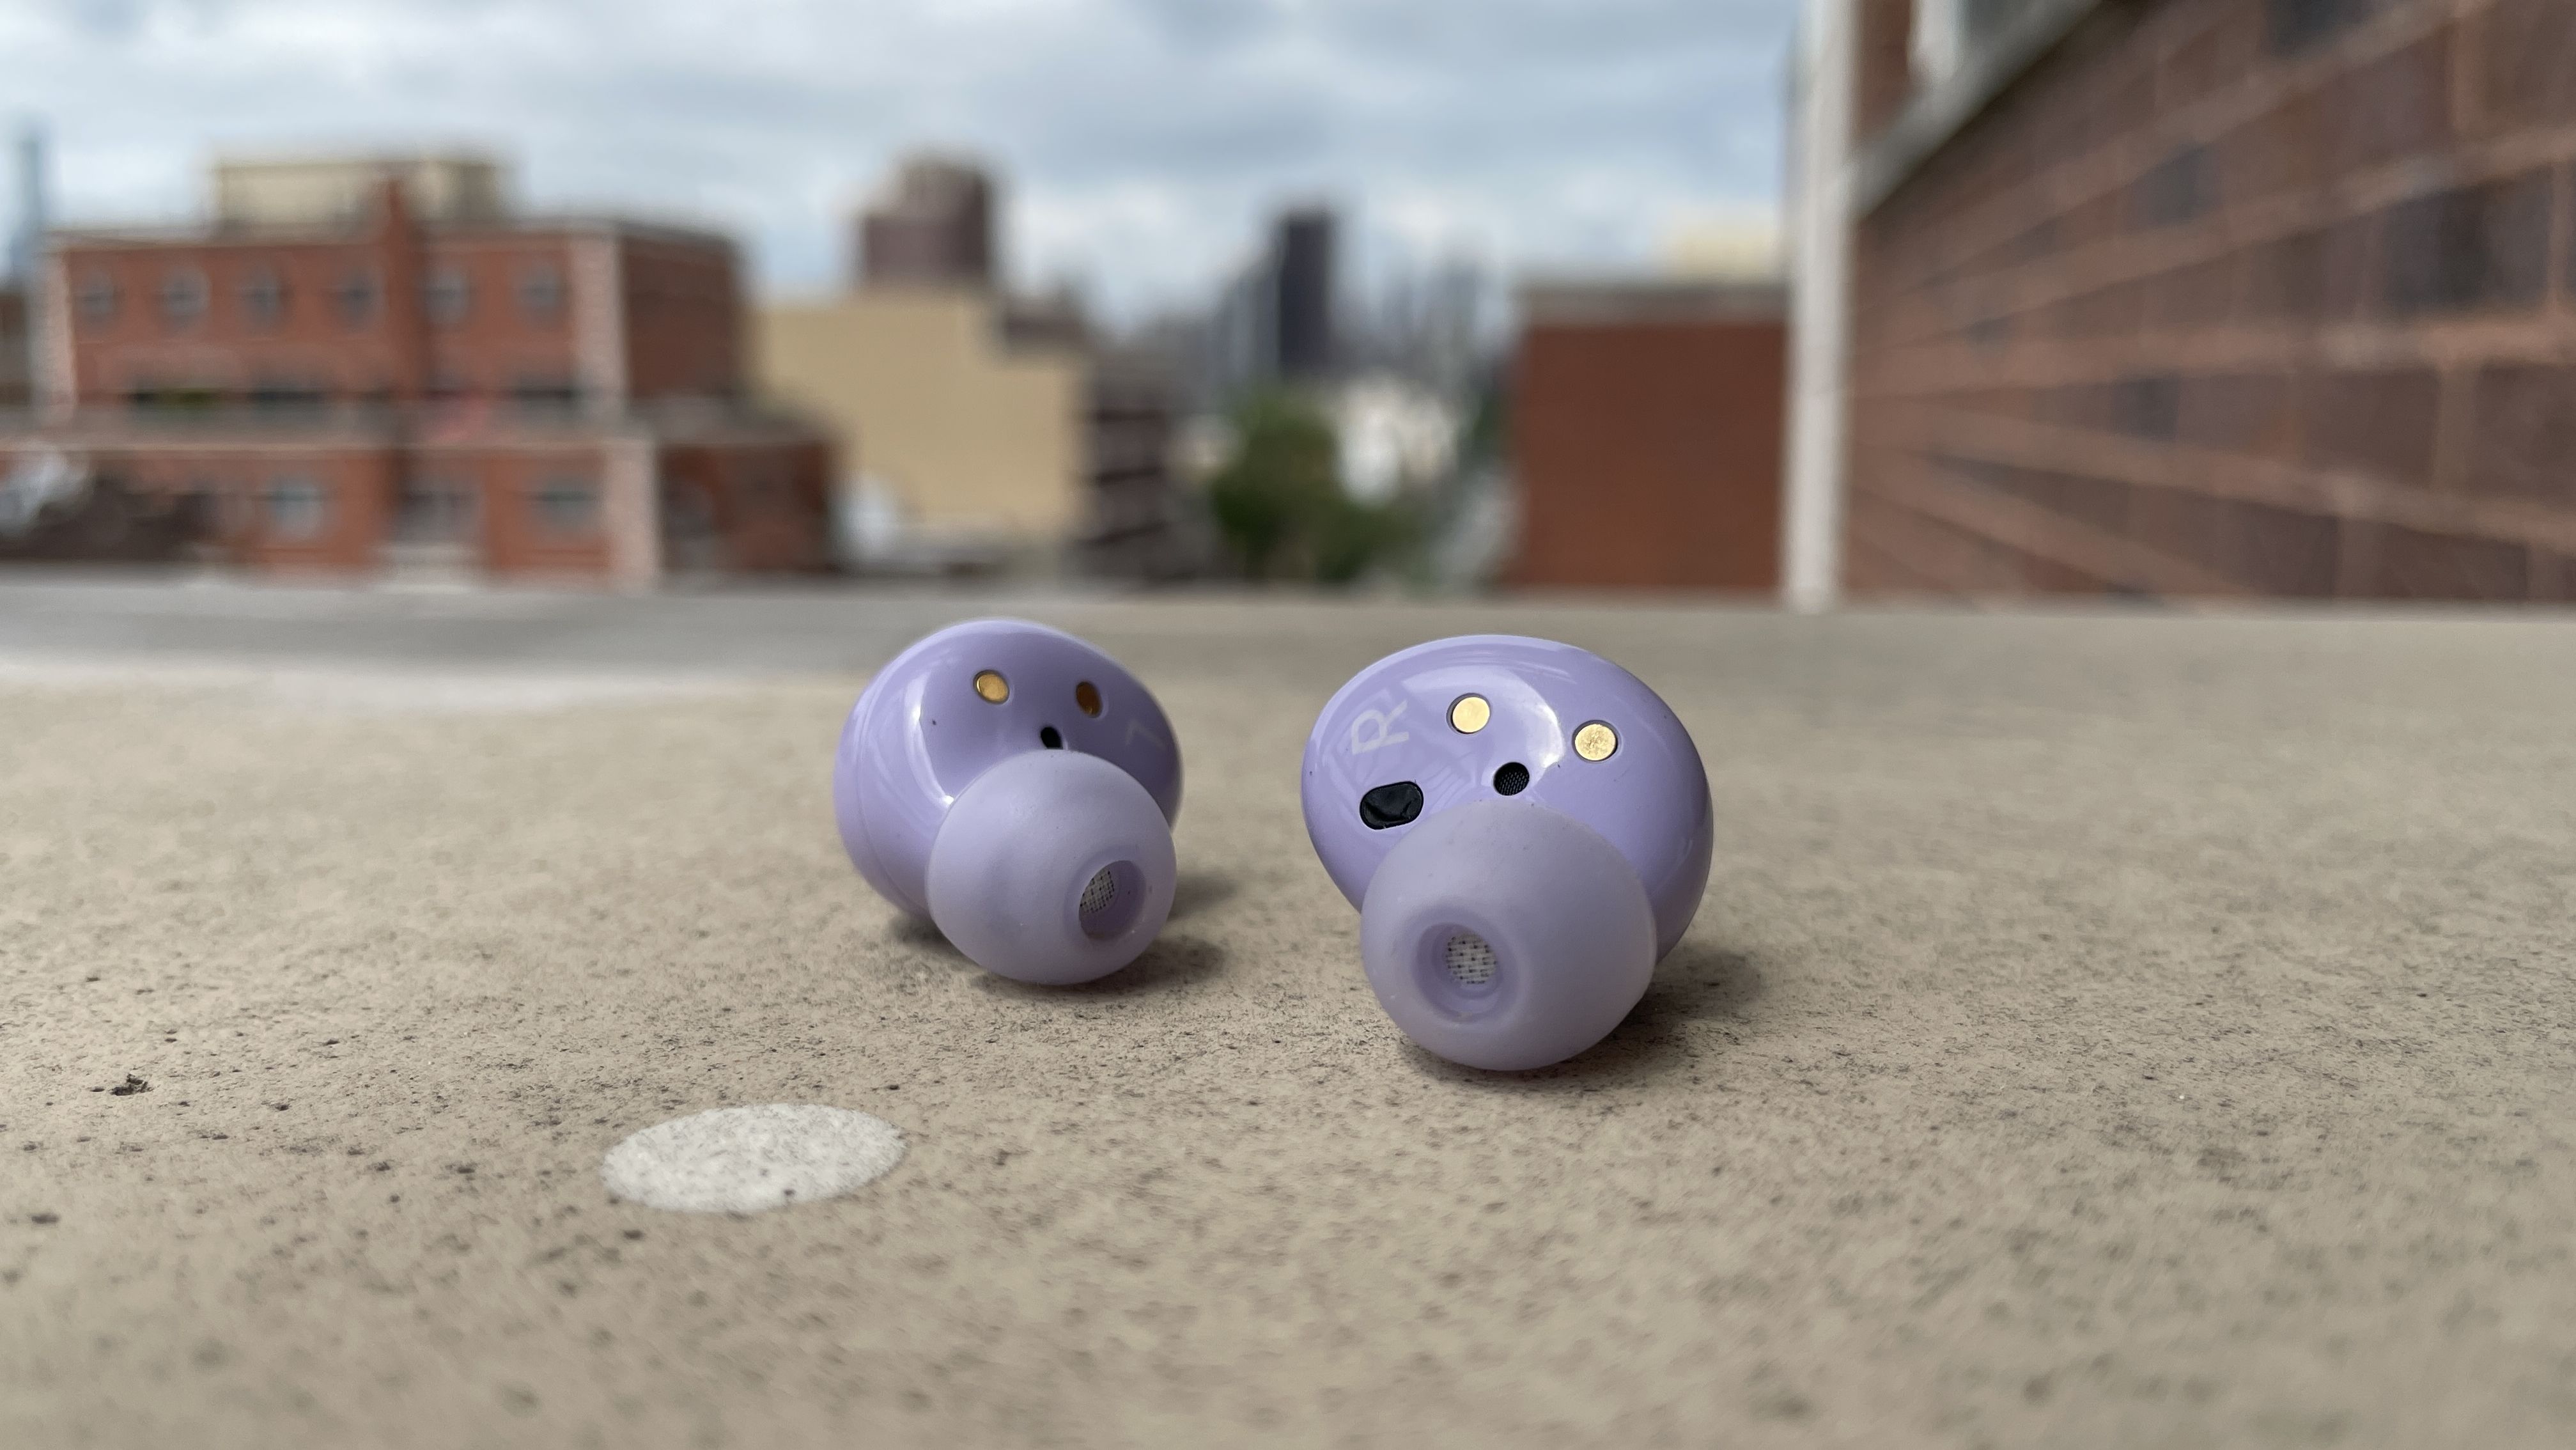 Samsung Galaxy Buds 2 review: nailing the basics with style - The Verge